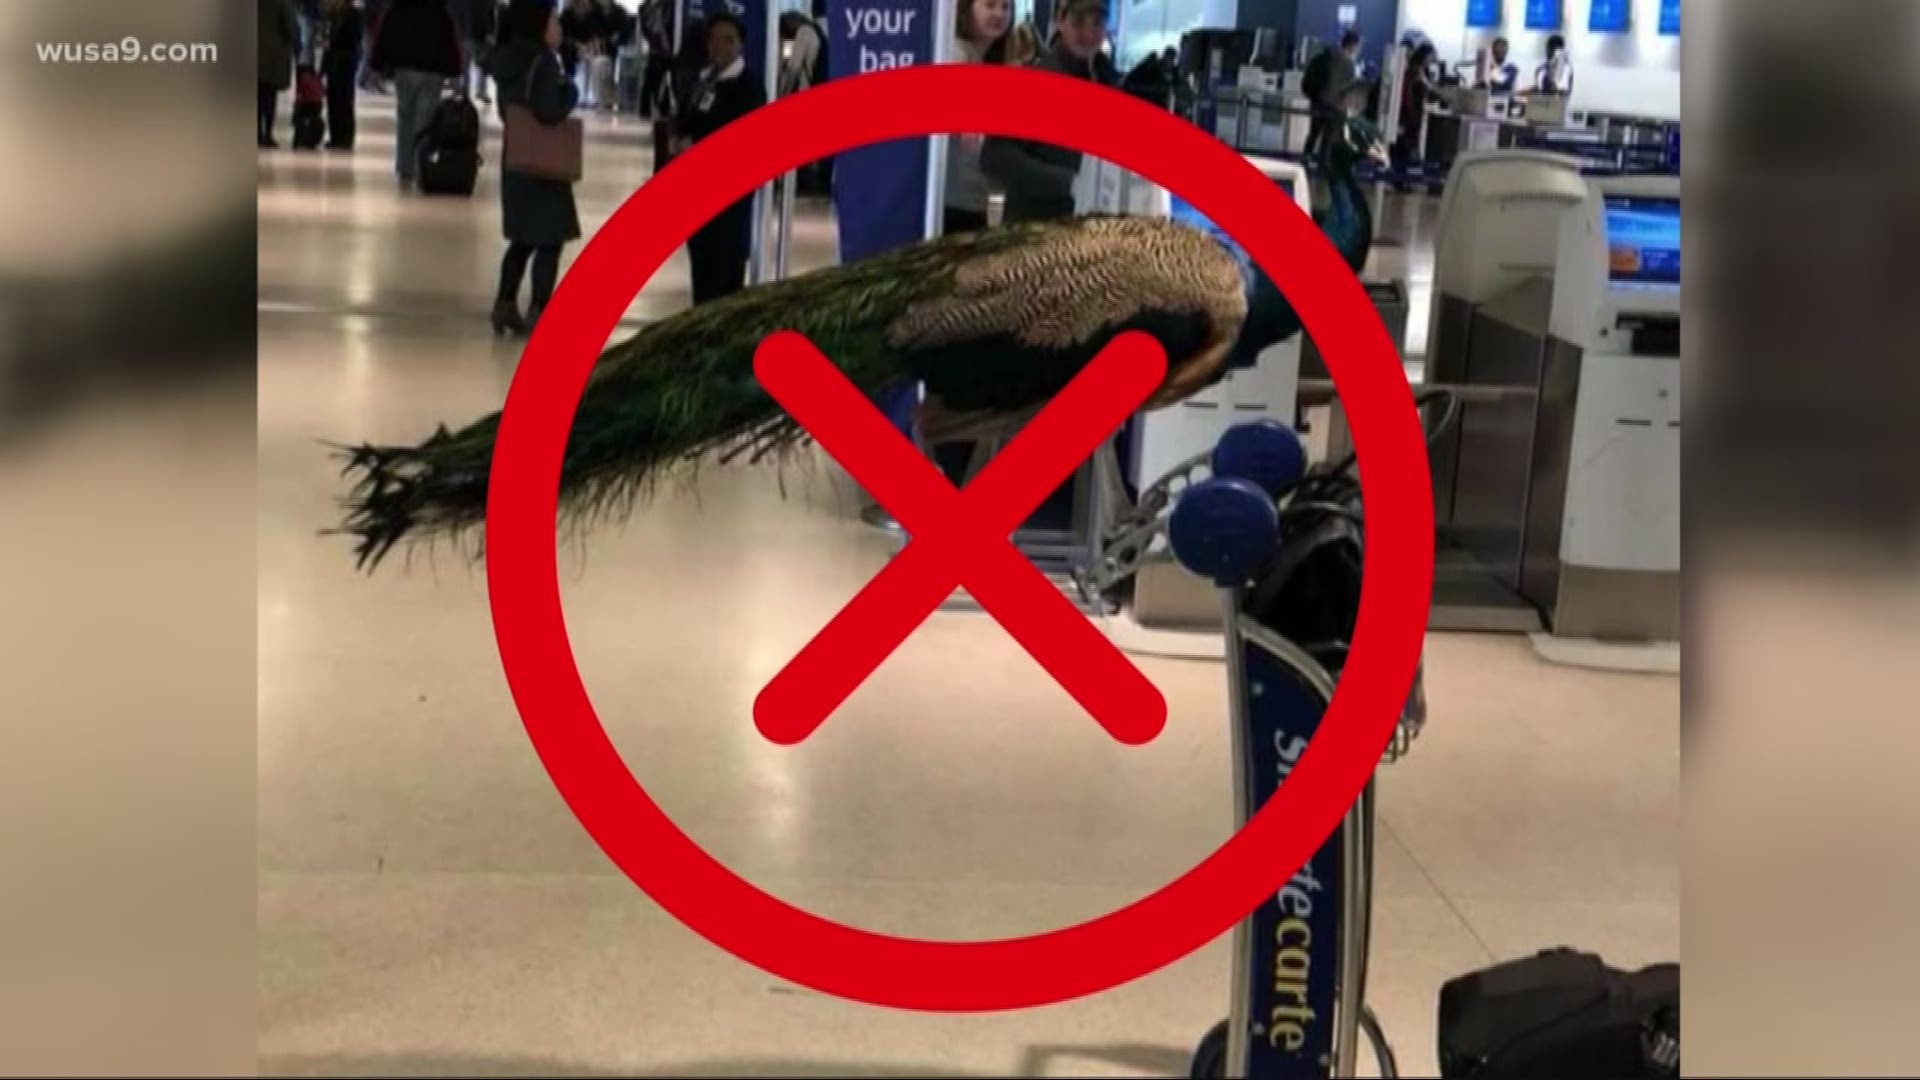 After TSA recovered two rocket launchers at BWI this week, we want to remind you of the items you can or cannot bring to the airport.